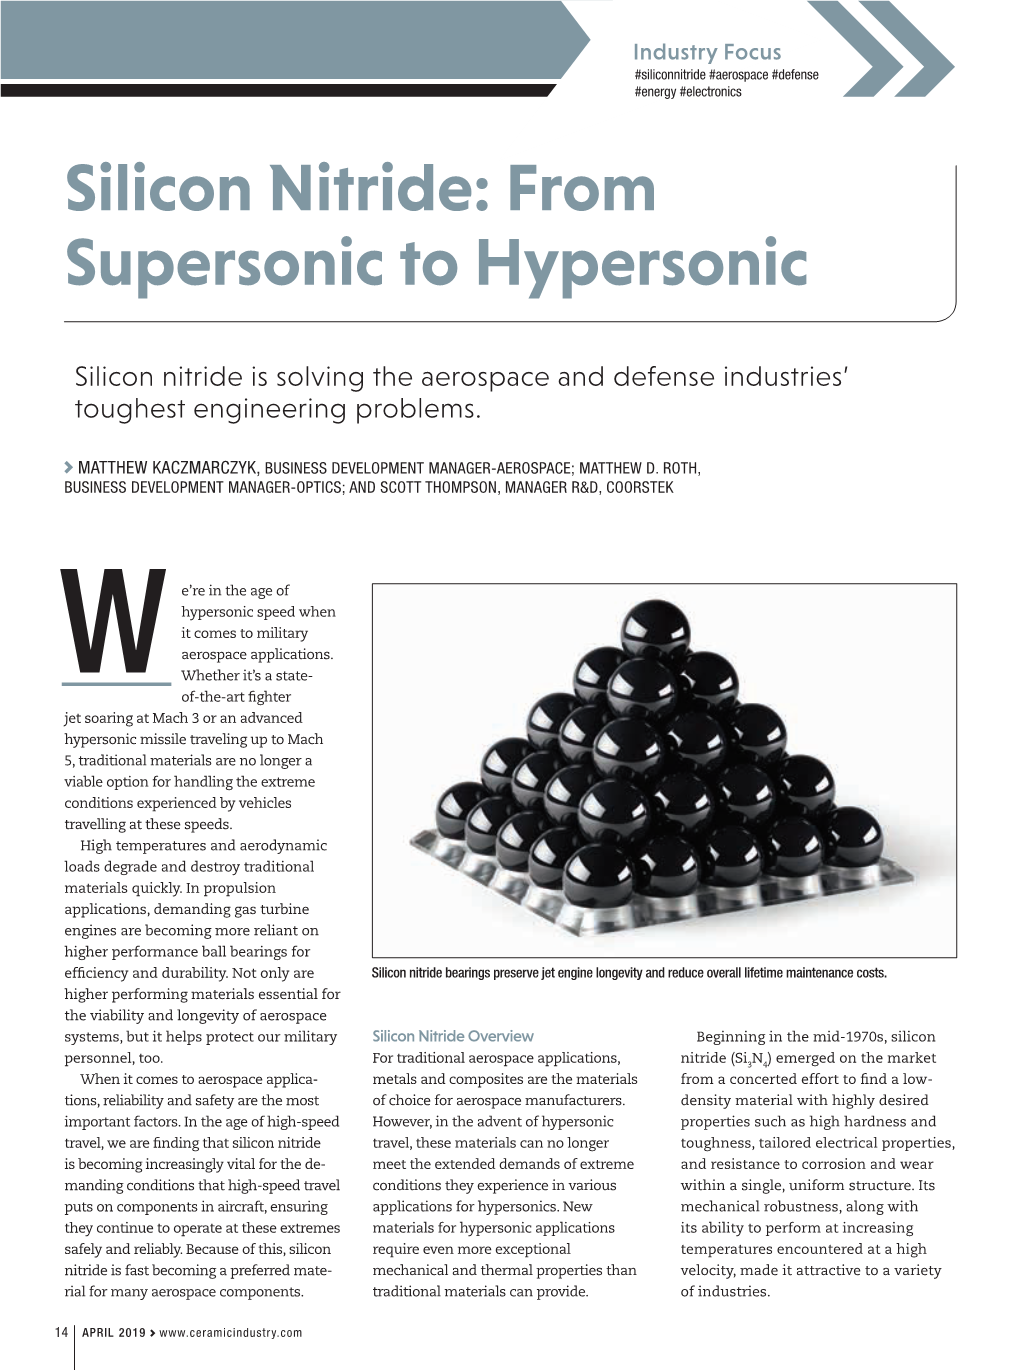 Silicon Nitride: from Supersonic to Hypersonic